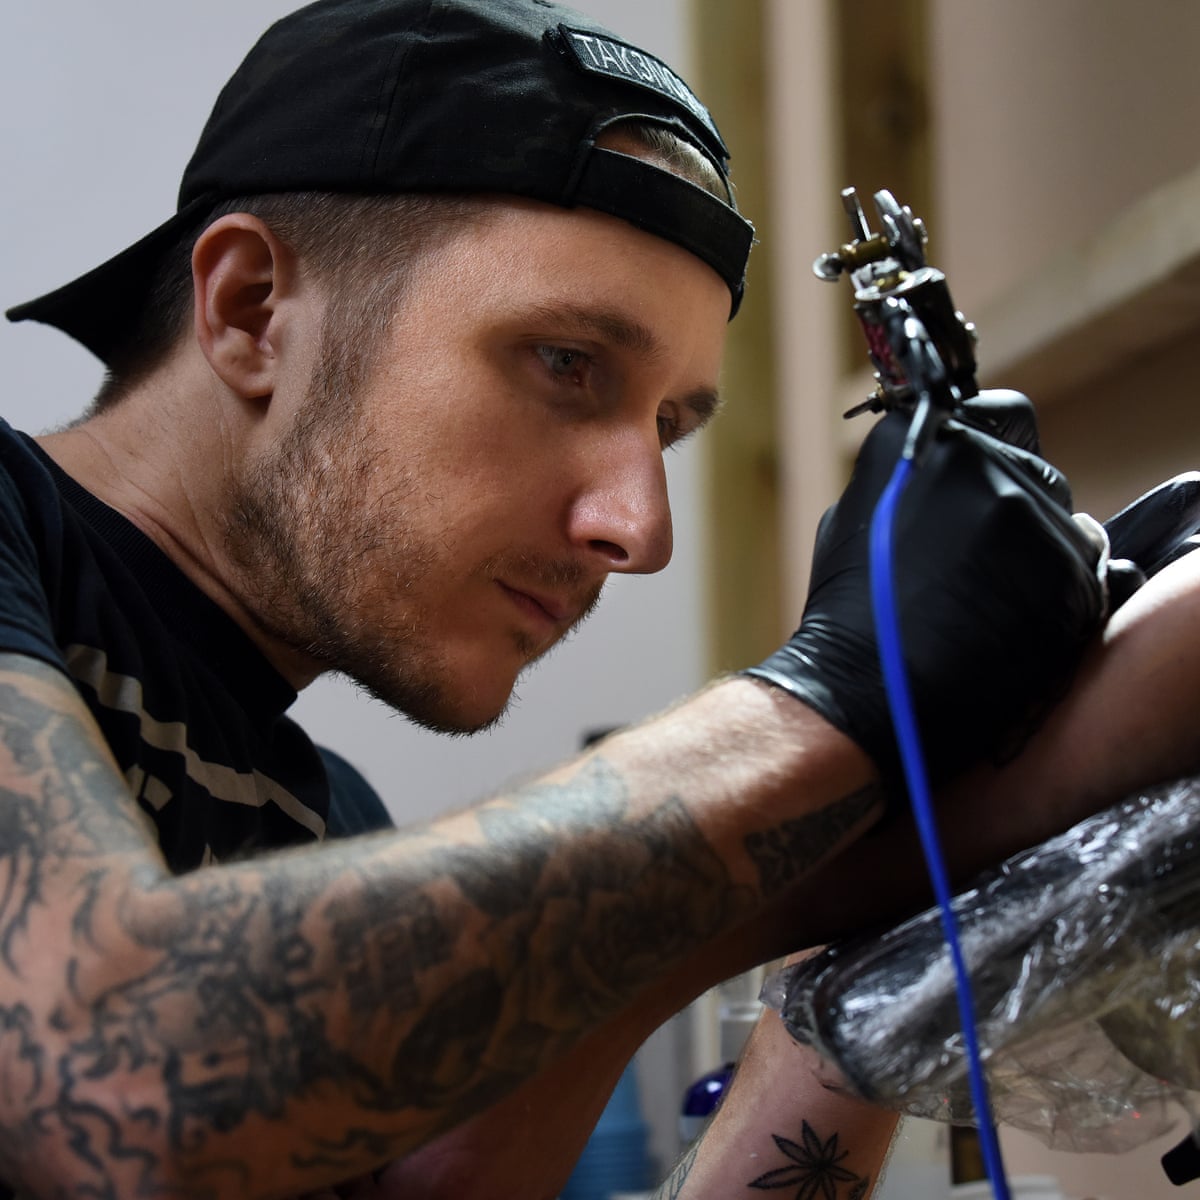 Would you let your arm be randomly inked by a tattooist to the stars? |  Tattoos | The Guardian